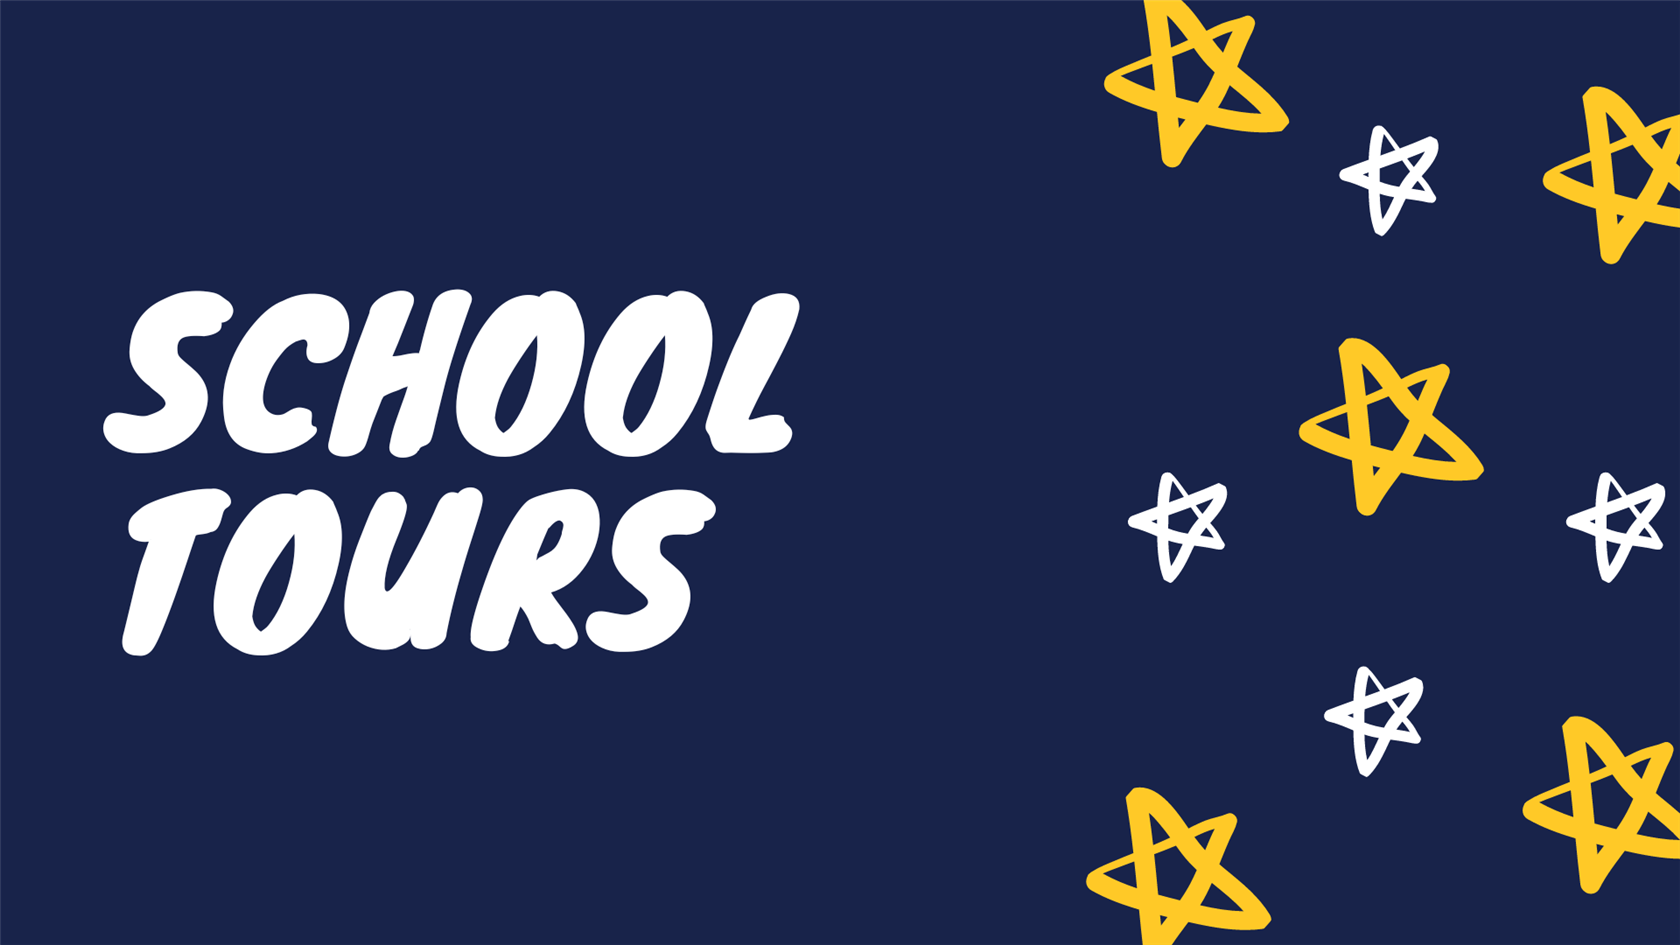  blue field with hand drawn white and yellow stars. "school tours" in white.